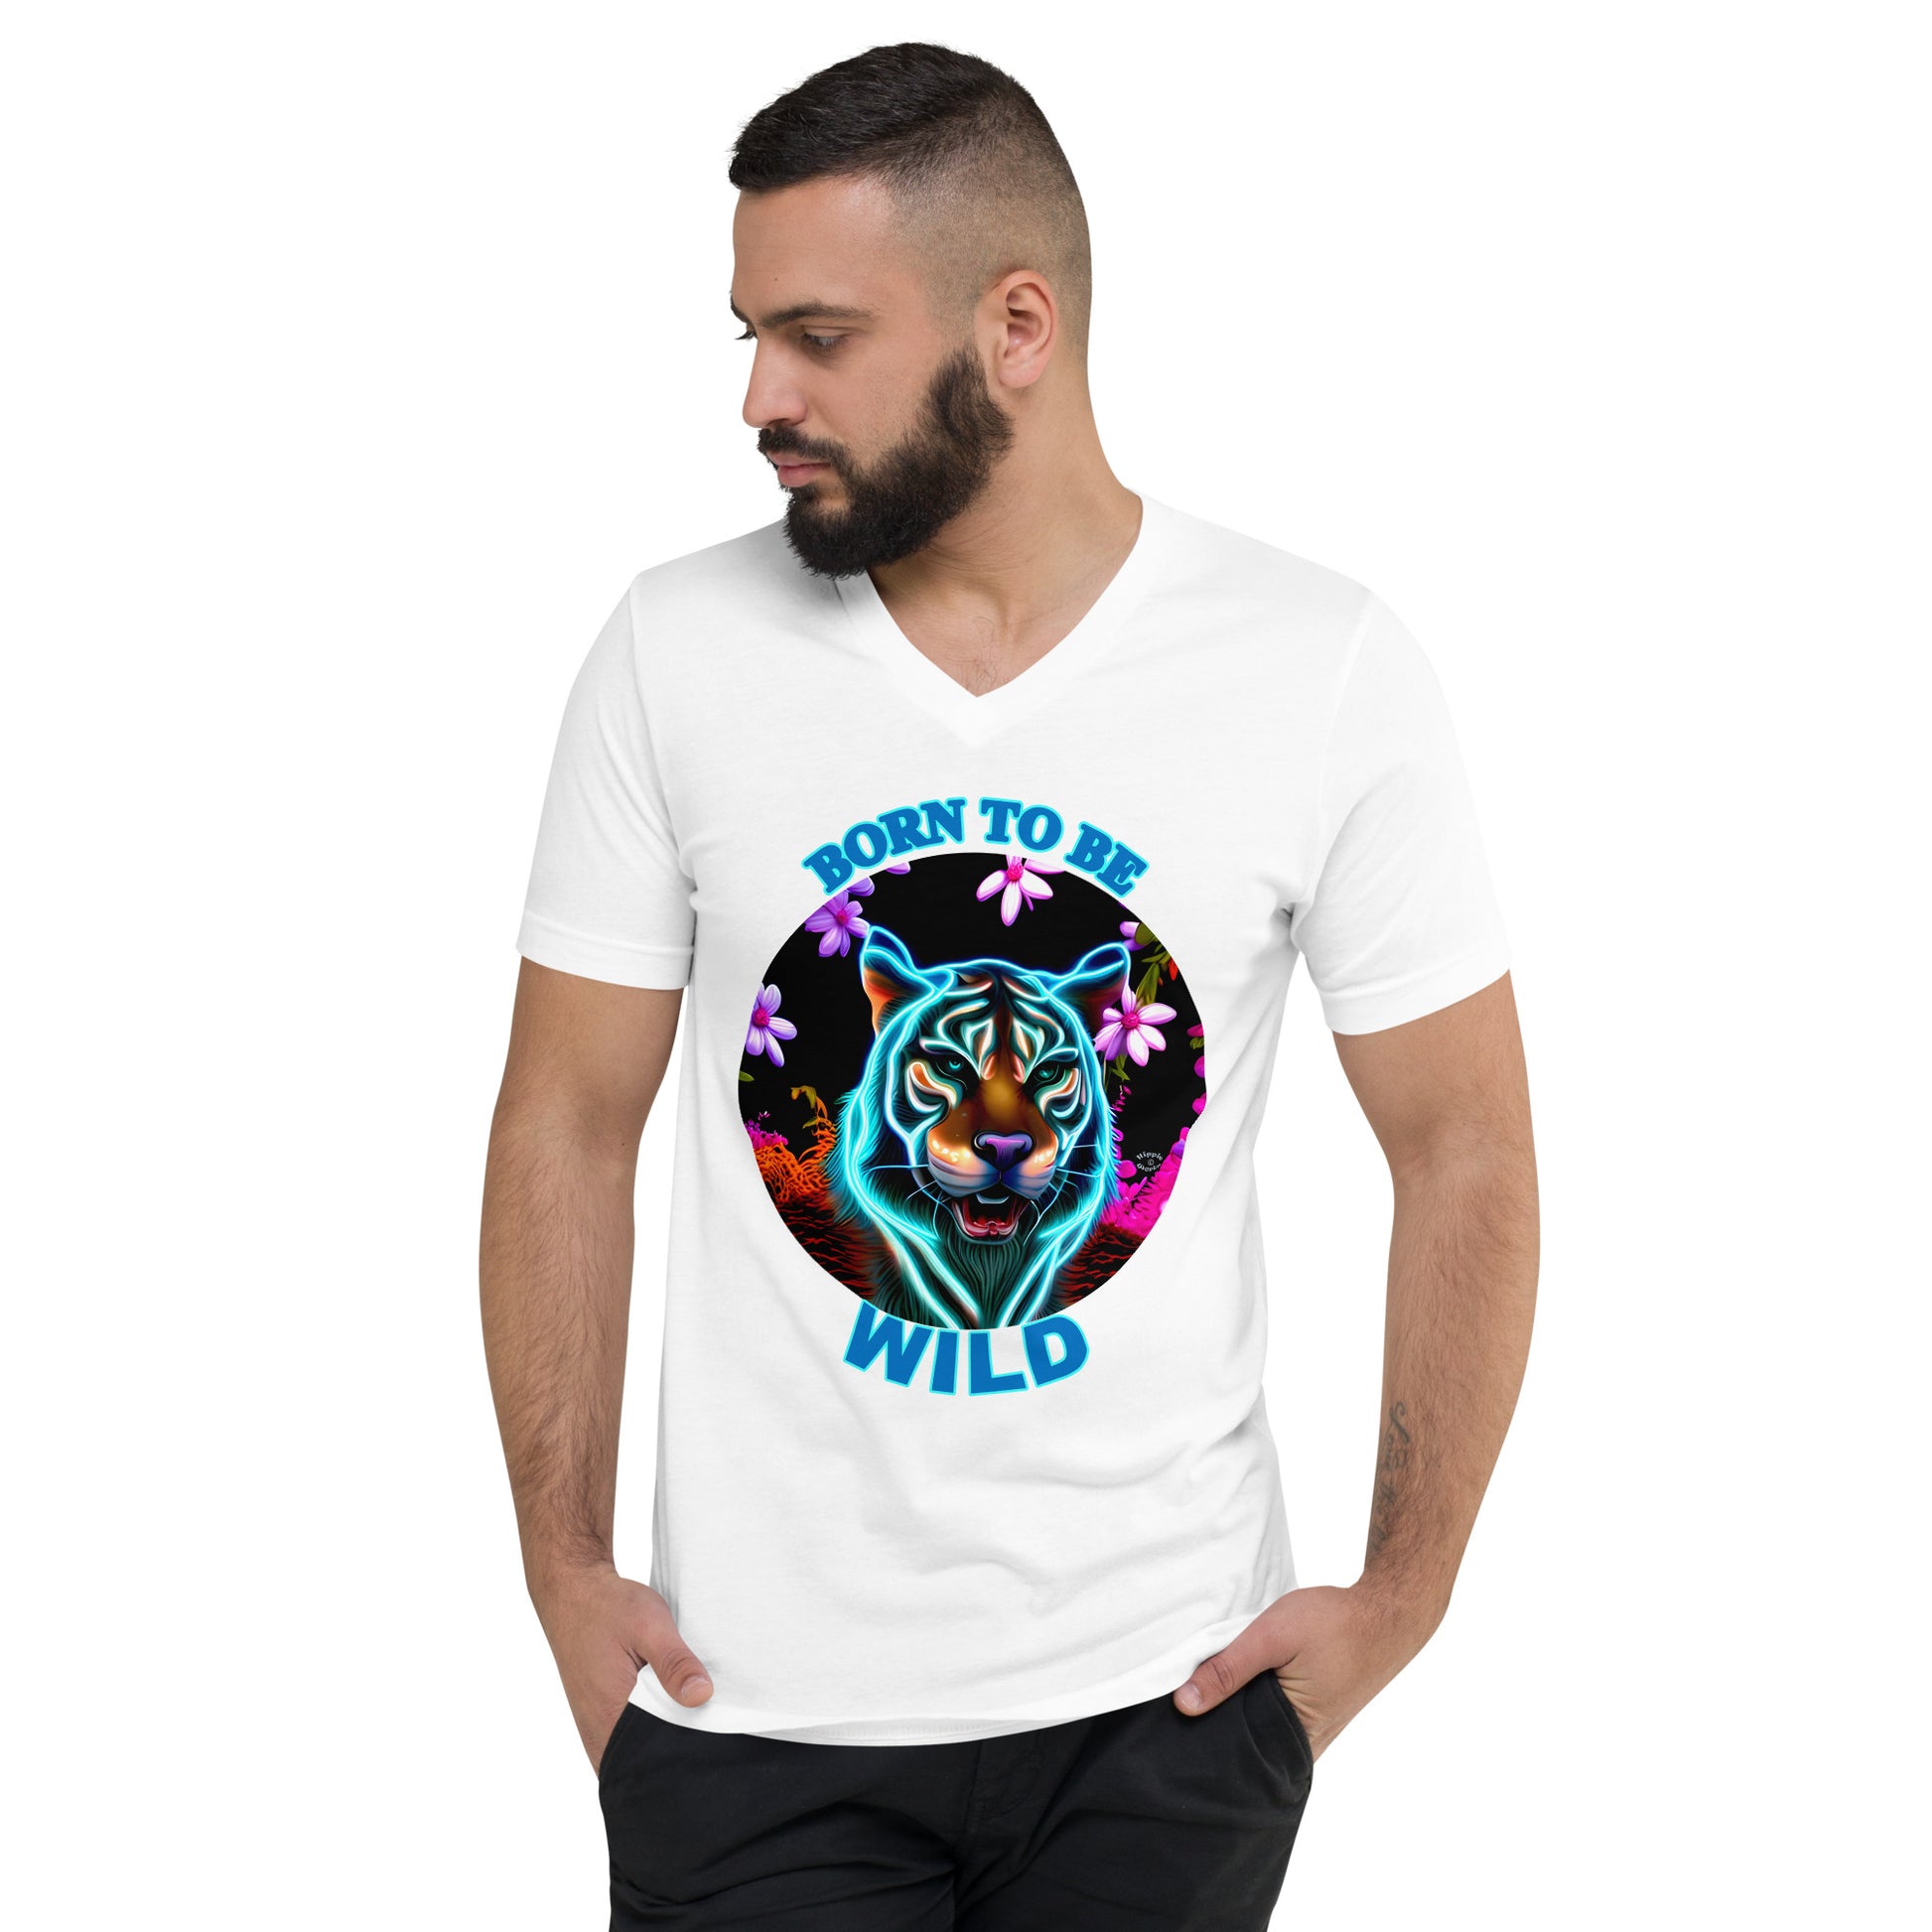 A picture of a man wearing a tshirt with the picture of a neon tiger surrounded by flowers and the text BORN TO BE WILD - white front